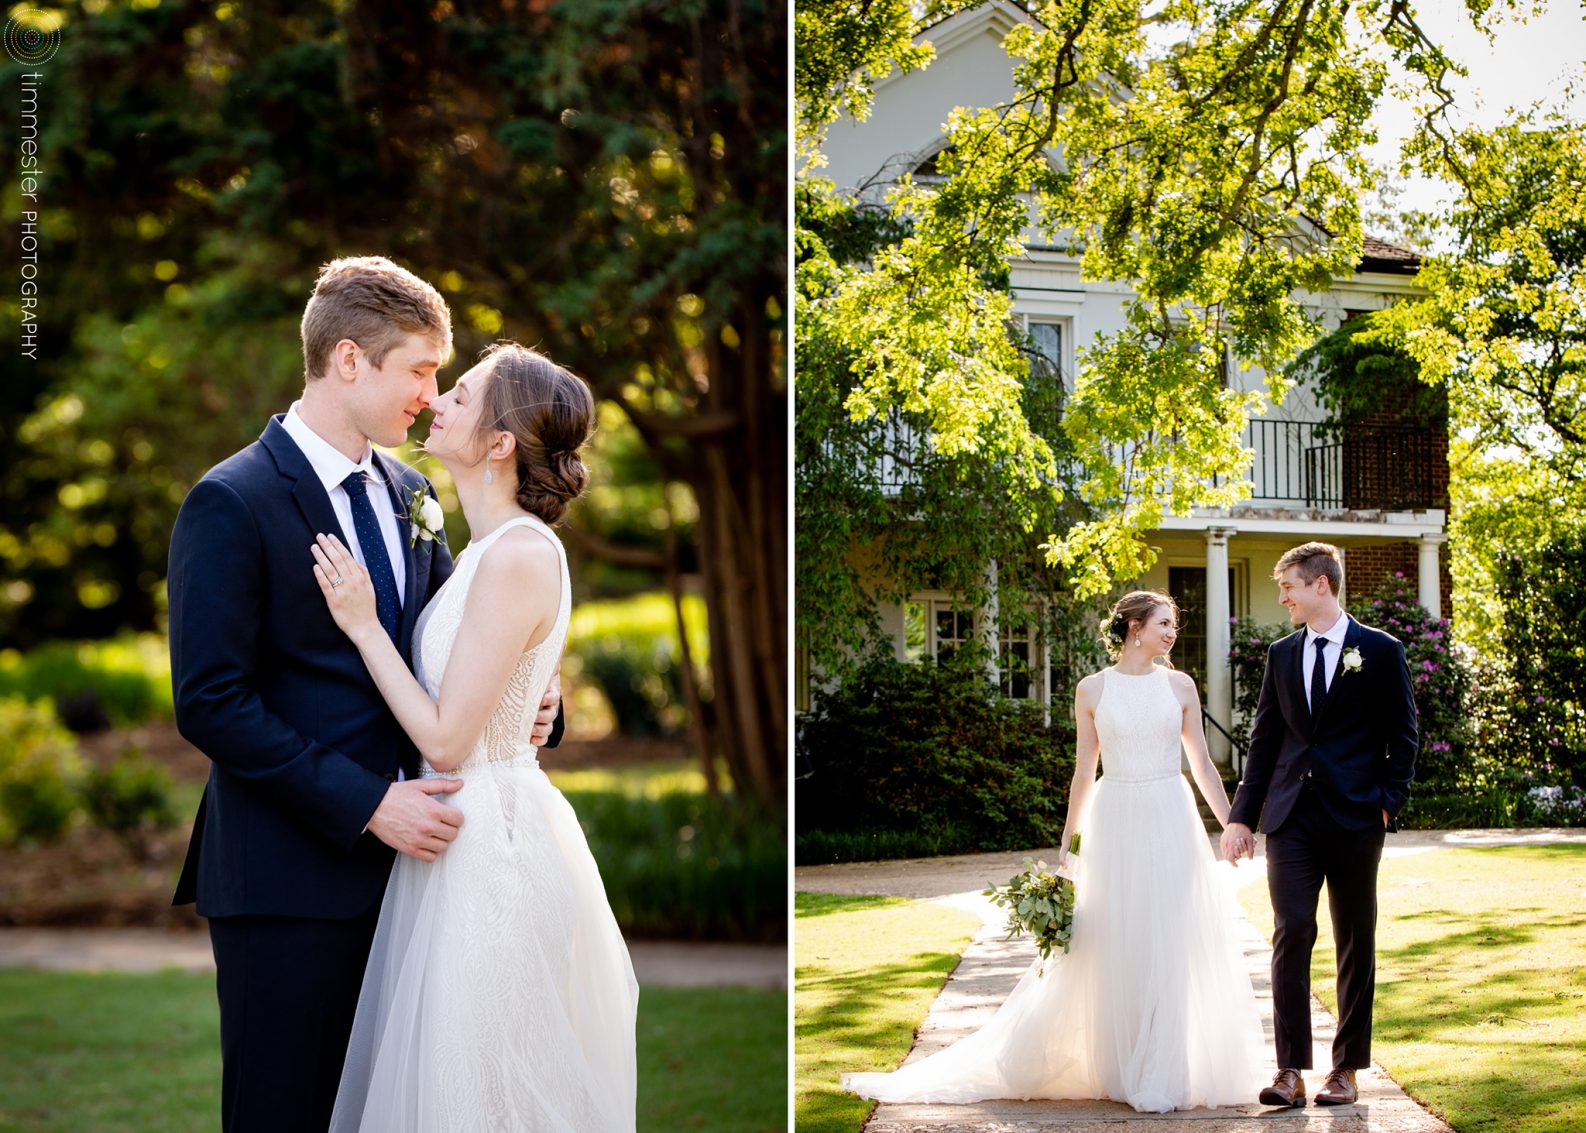 Bride and groom portraits in the gardens of Fred Fletcher Park in Raleigh, North Carolina.